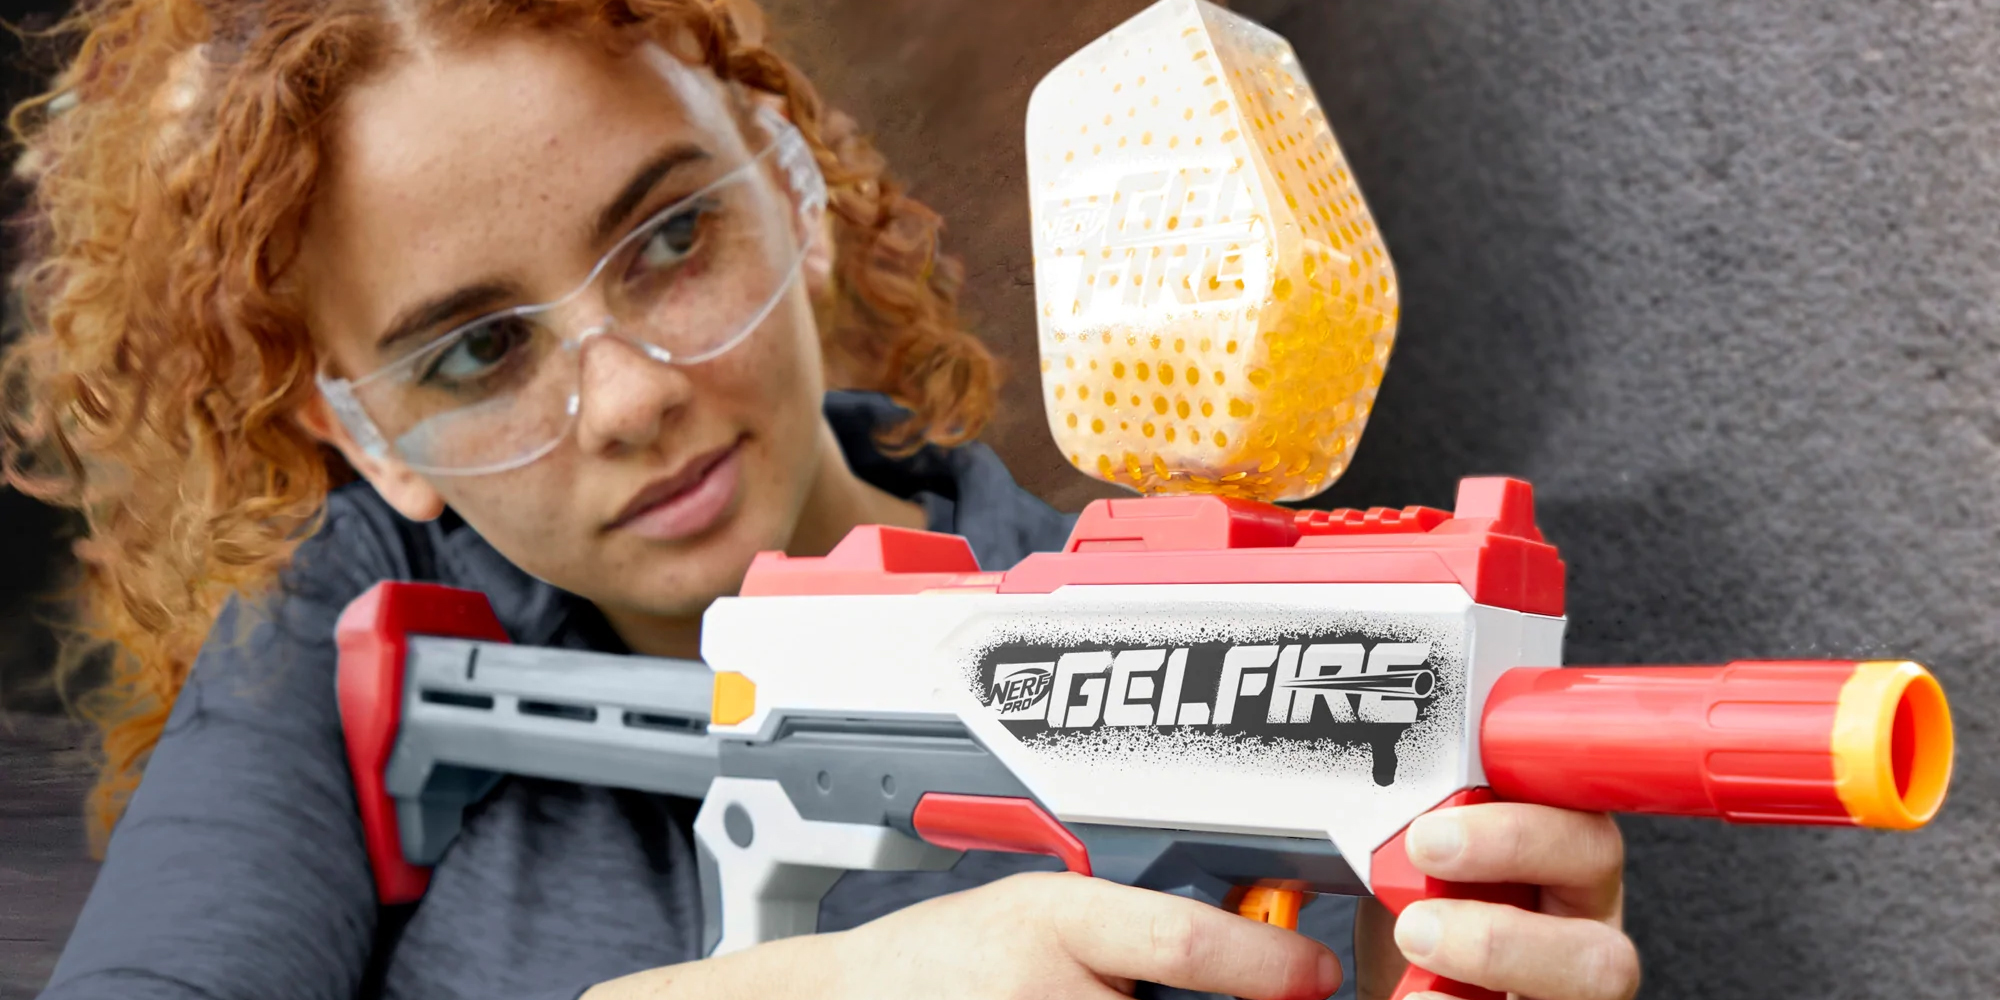 This is one big Nerf Blaster! (I'm releasing the final video for